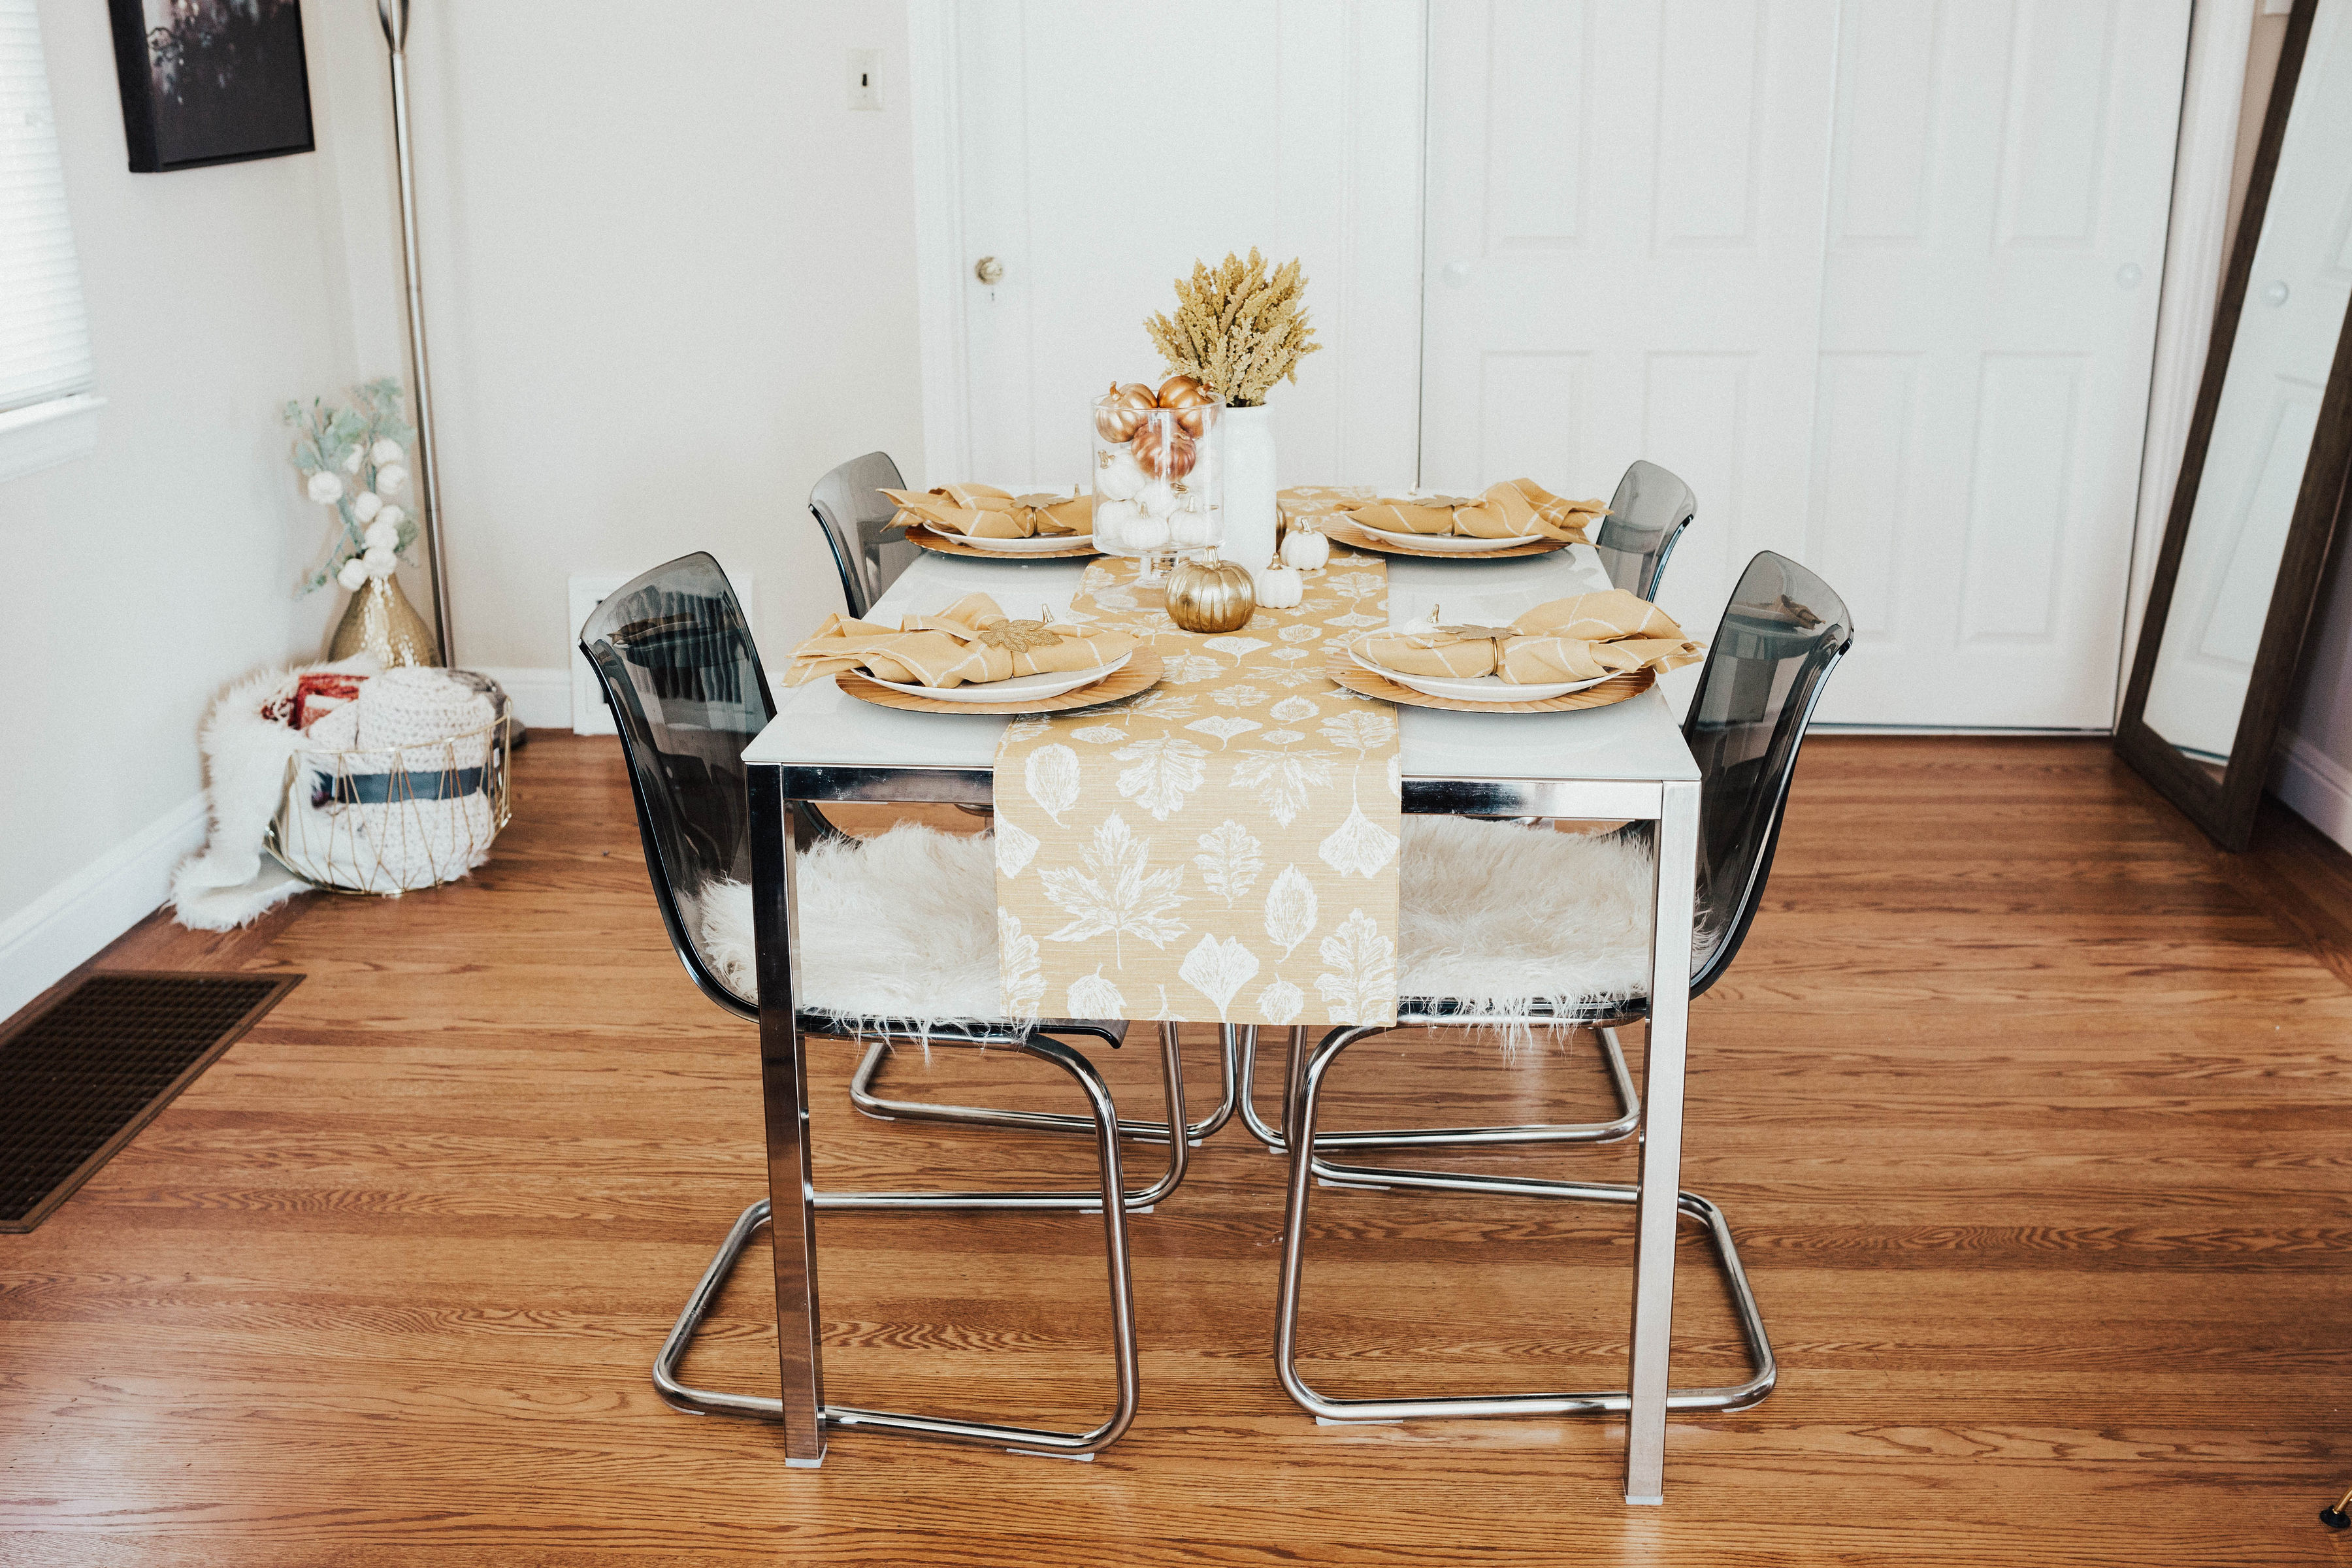 Bloggers Ashley Zeal and Emily Wieczorek share a hostess gift guide 2018. They are sharing all the best gifts to bring your Thanksgiving hostess.